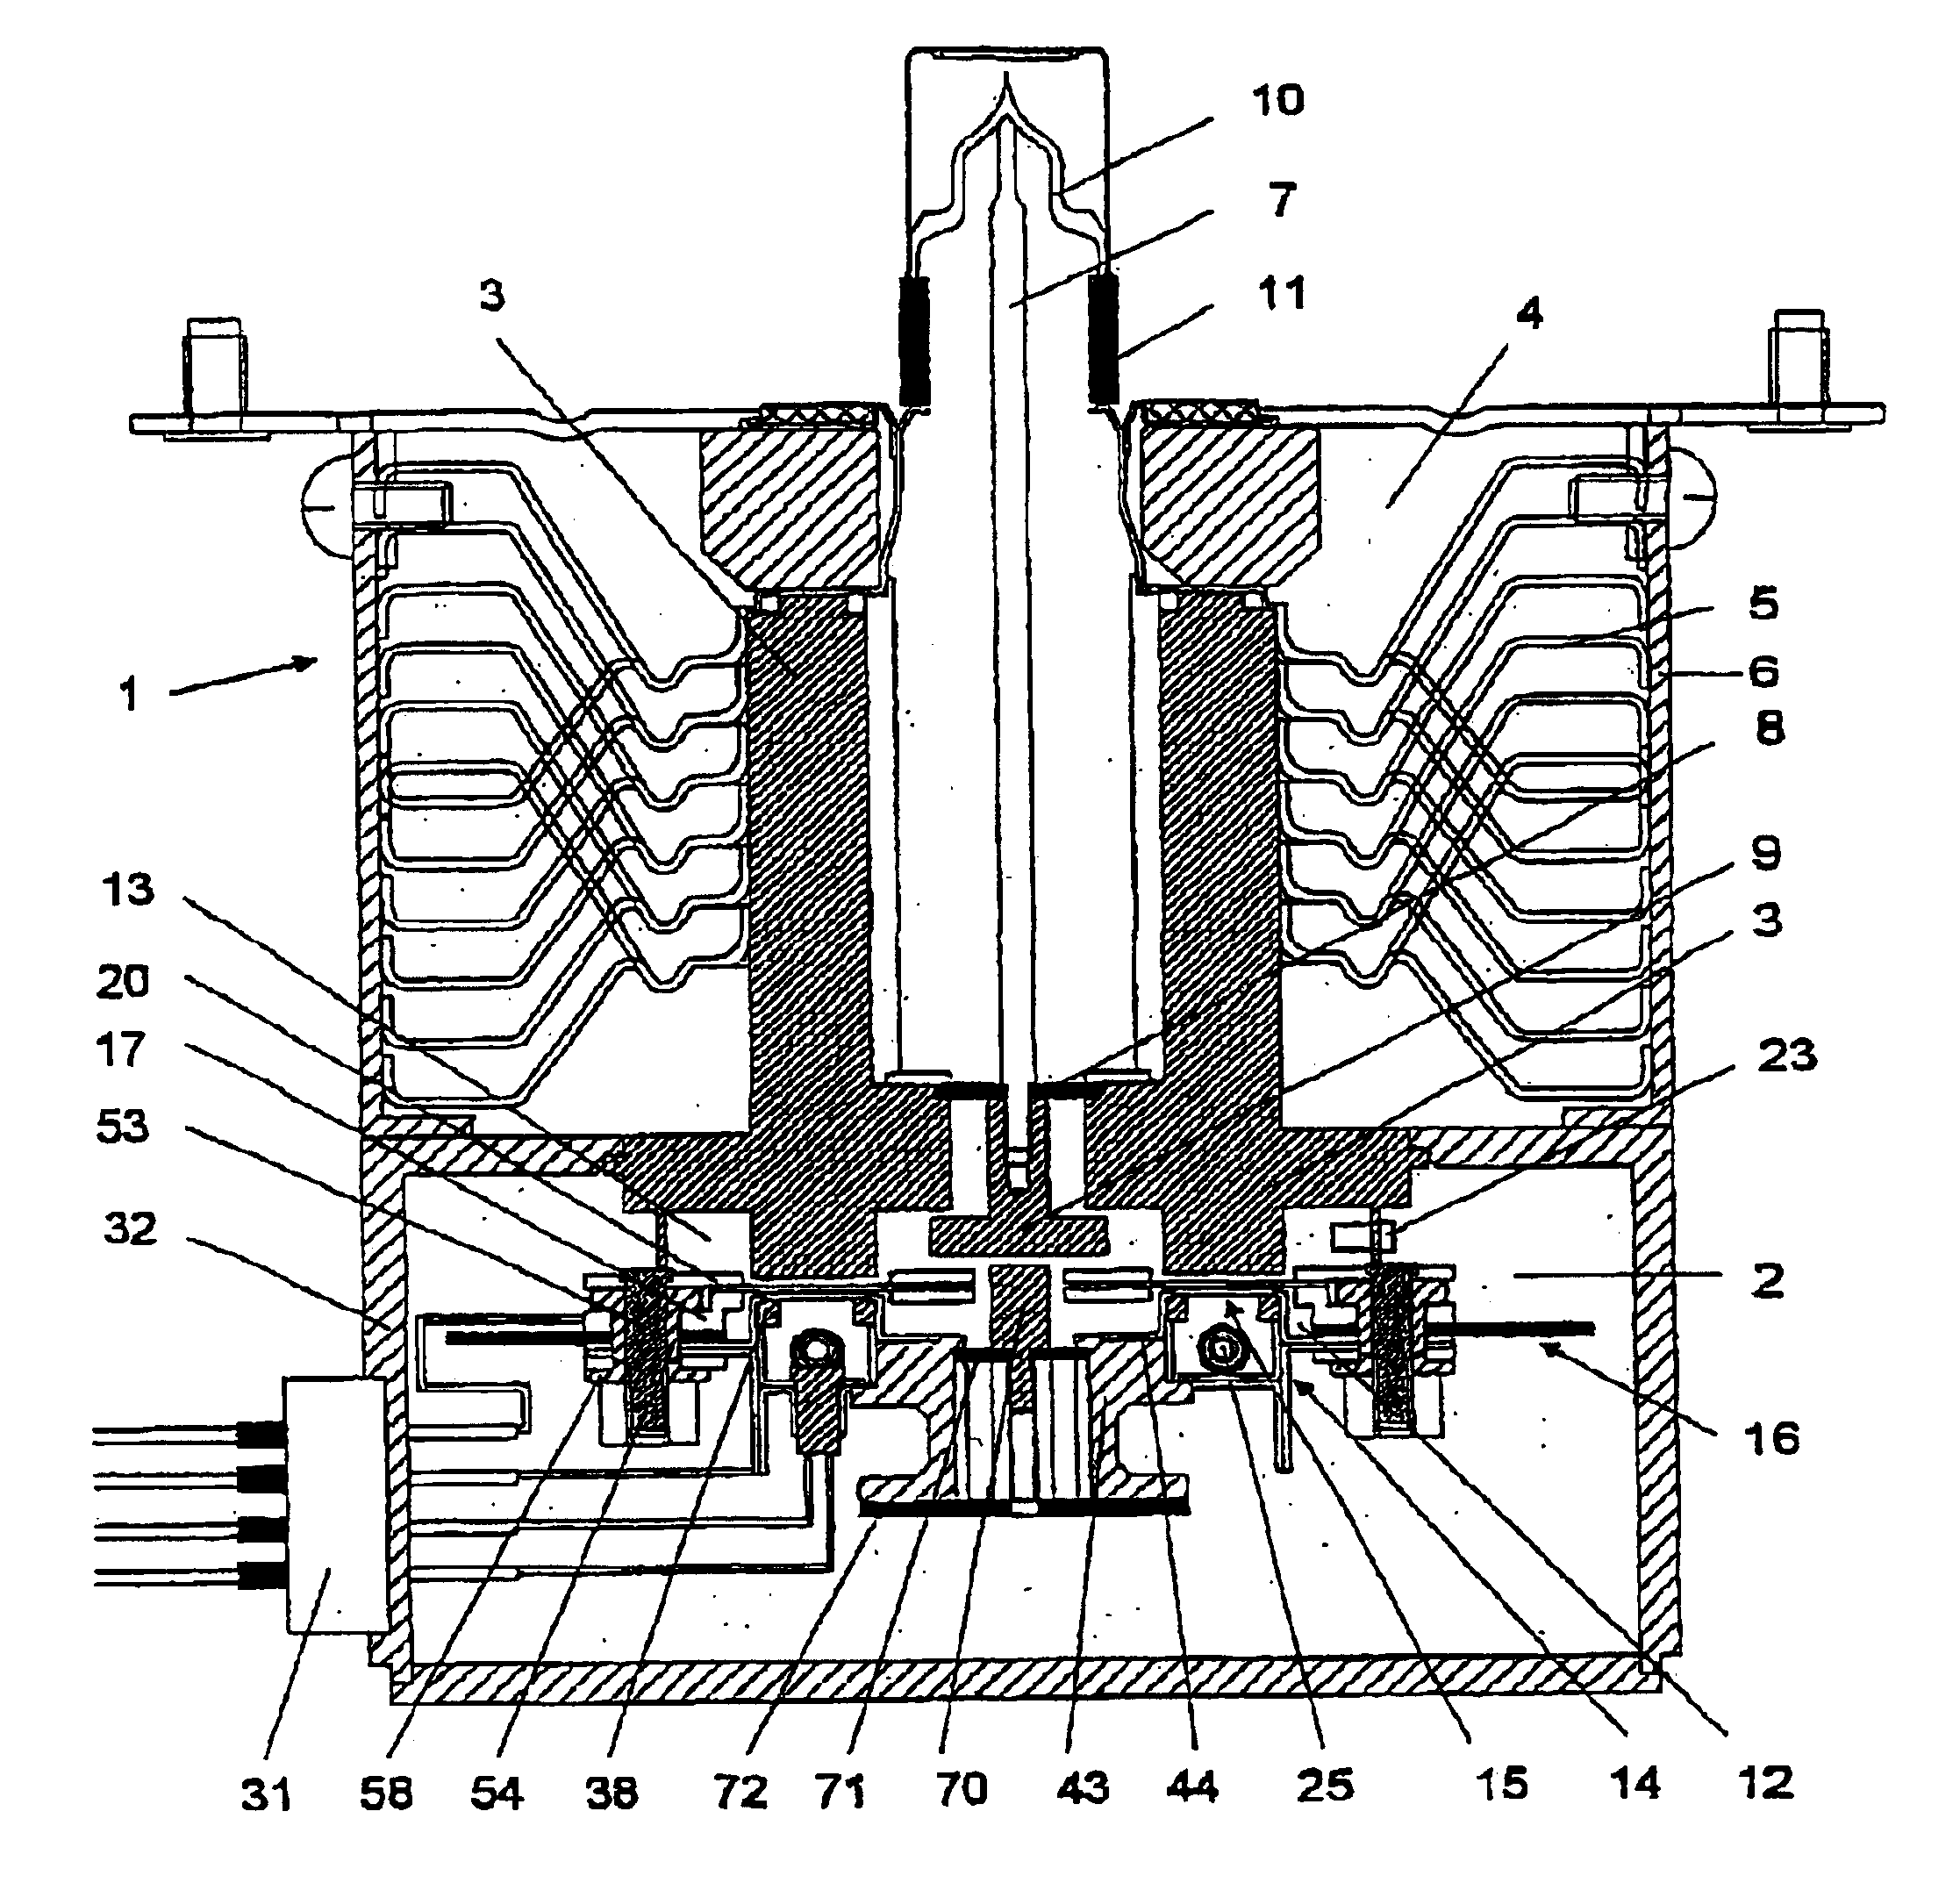 Device for producing high frequency microwaves